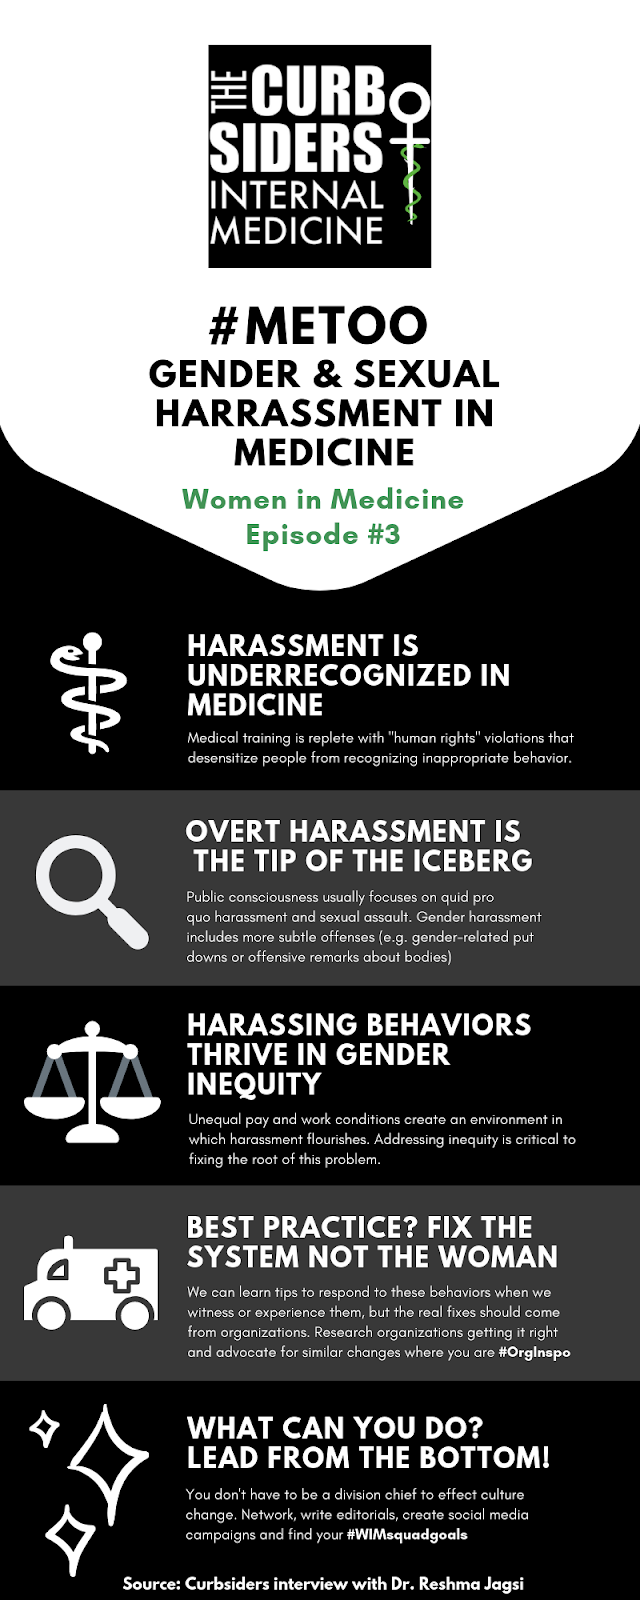 Infographic on Gender and Sexual Harassment by Dr. Leah Witt from Curbsiders #162 with Dr. Reshma Jagsi MD, DPhil